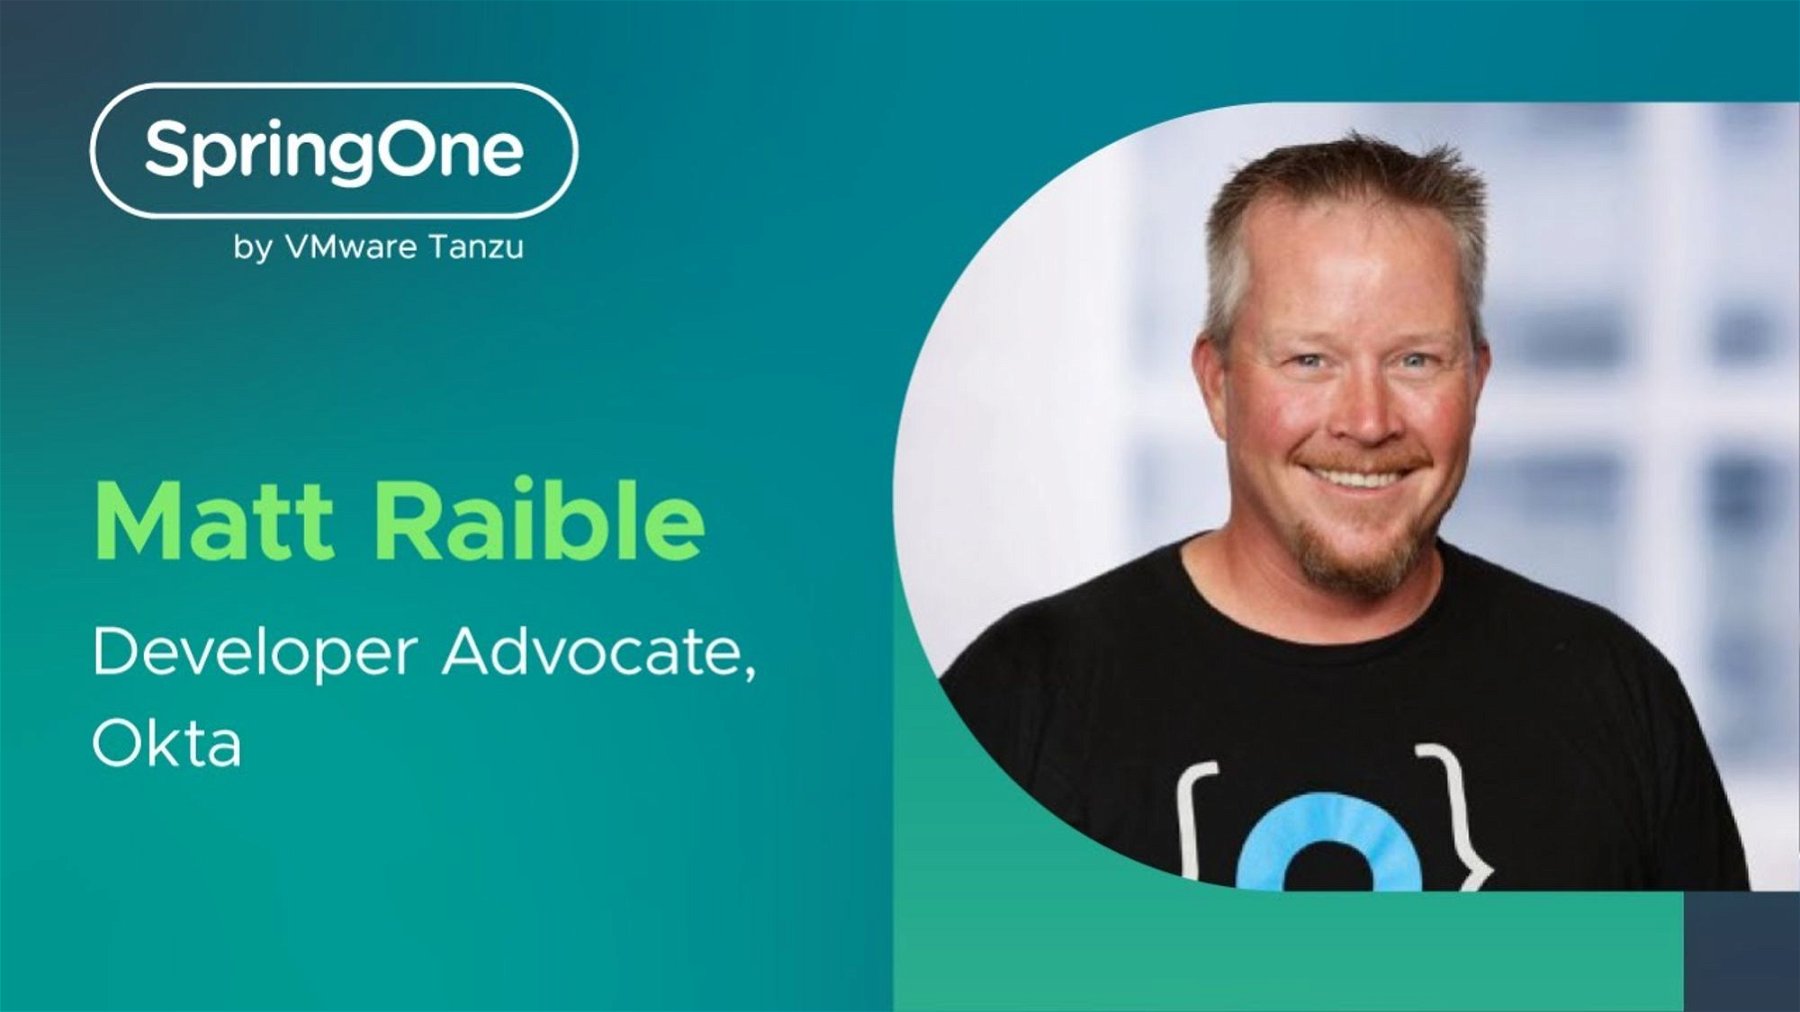 The Golden Path to SpringOne: Reactive Microservices with Spring Boot and JHipster with Matt Raible